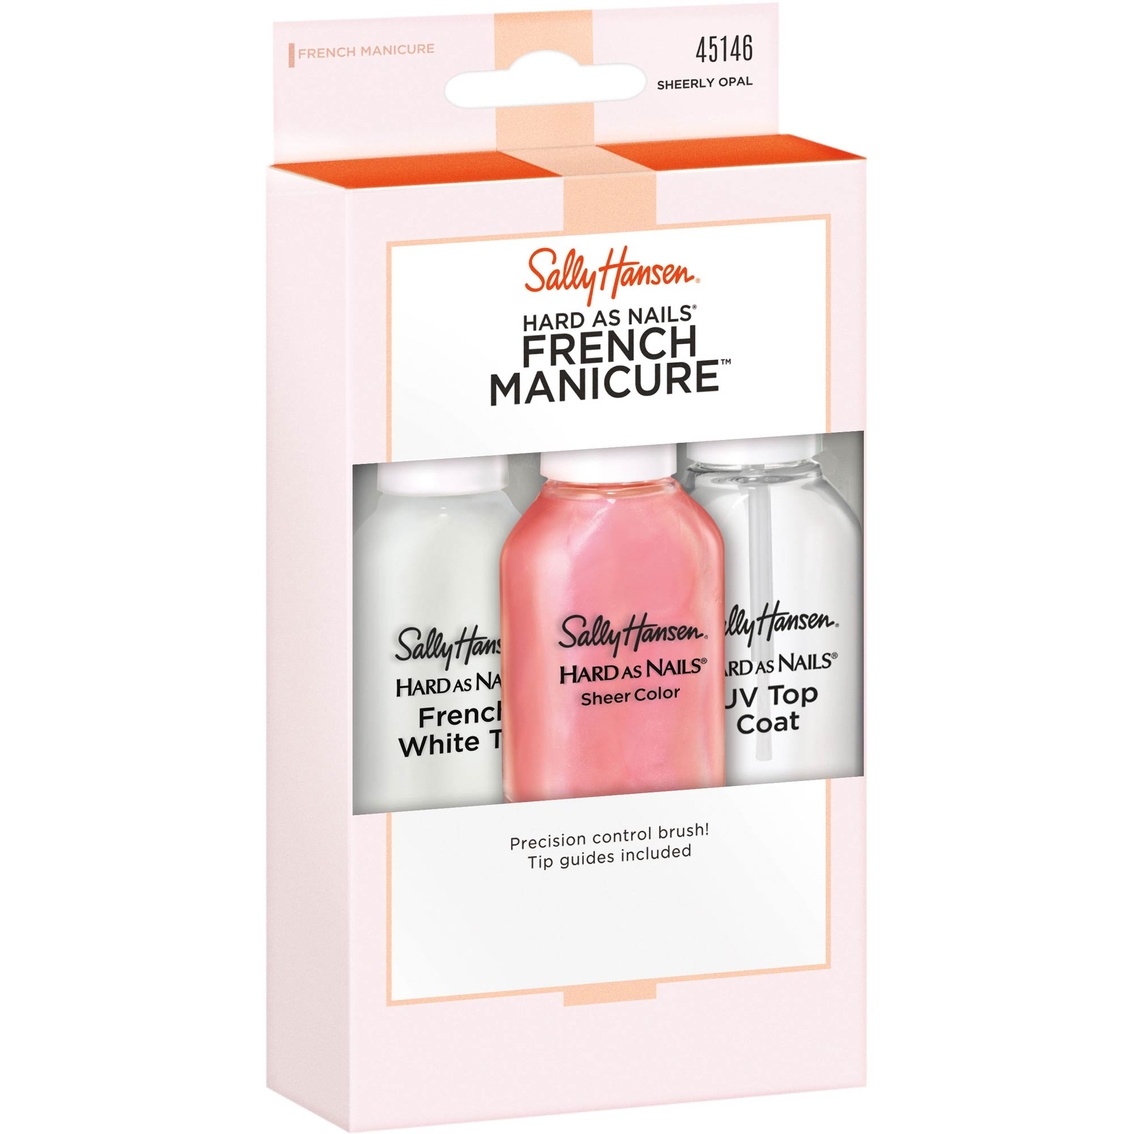 Sally Hansen Hard As Nails Sheerly Opal French Manicure Kit - Image 2 of 3